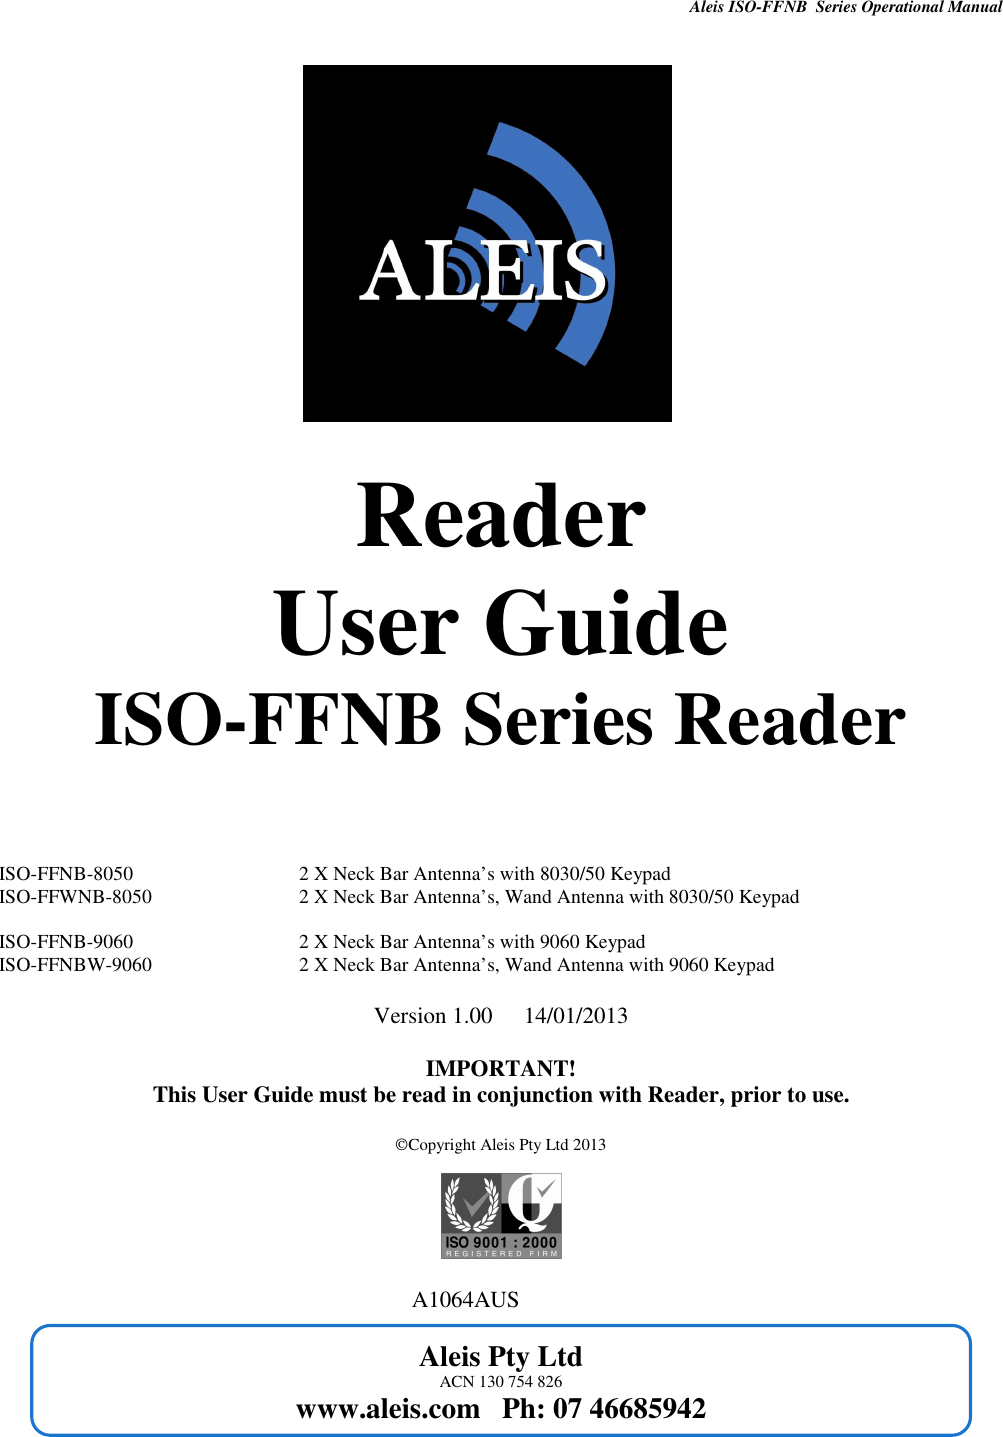 Aleis ISO-FFNB  Series Operational Manual      Aleis Pty Ltd ACN 130 754 826 www.aleis.com   Ph: 07 46685942             Reader User Guide ISO-FFNB Series Reader     ISO-FFNB-8050      2 X Neck Bar Antenna’s with 8030/50 Keypad ISO-FFWNB-8050    2 X Neck Bar Antenna’s, Wand Antenna with 8030/50 Keypad  ISO-FFNB-9060      2 X Neck Bar Antenna’s with 9060 Keypad ISO-FFNBW-9060         2 X Neck Bar Antenna’s, Wand Antenna with 9060 Keypad  Version 1.00  14/01/2013  IMPORTANT! This User Guide must be read in conjunction with Reader, prior to use.  Copyright Aleis Pty Ltd 2013                                                                              A1064AUS   